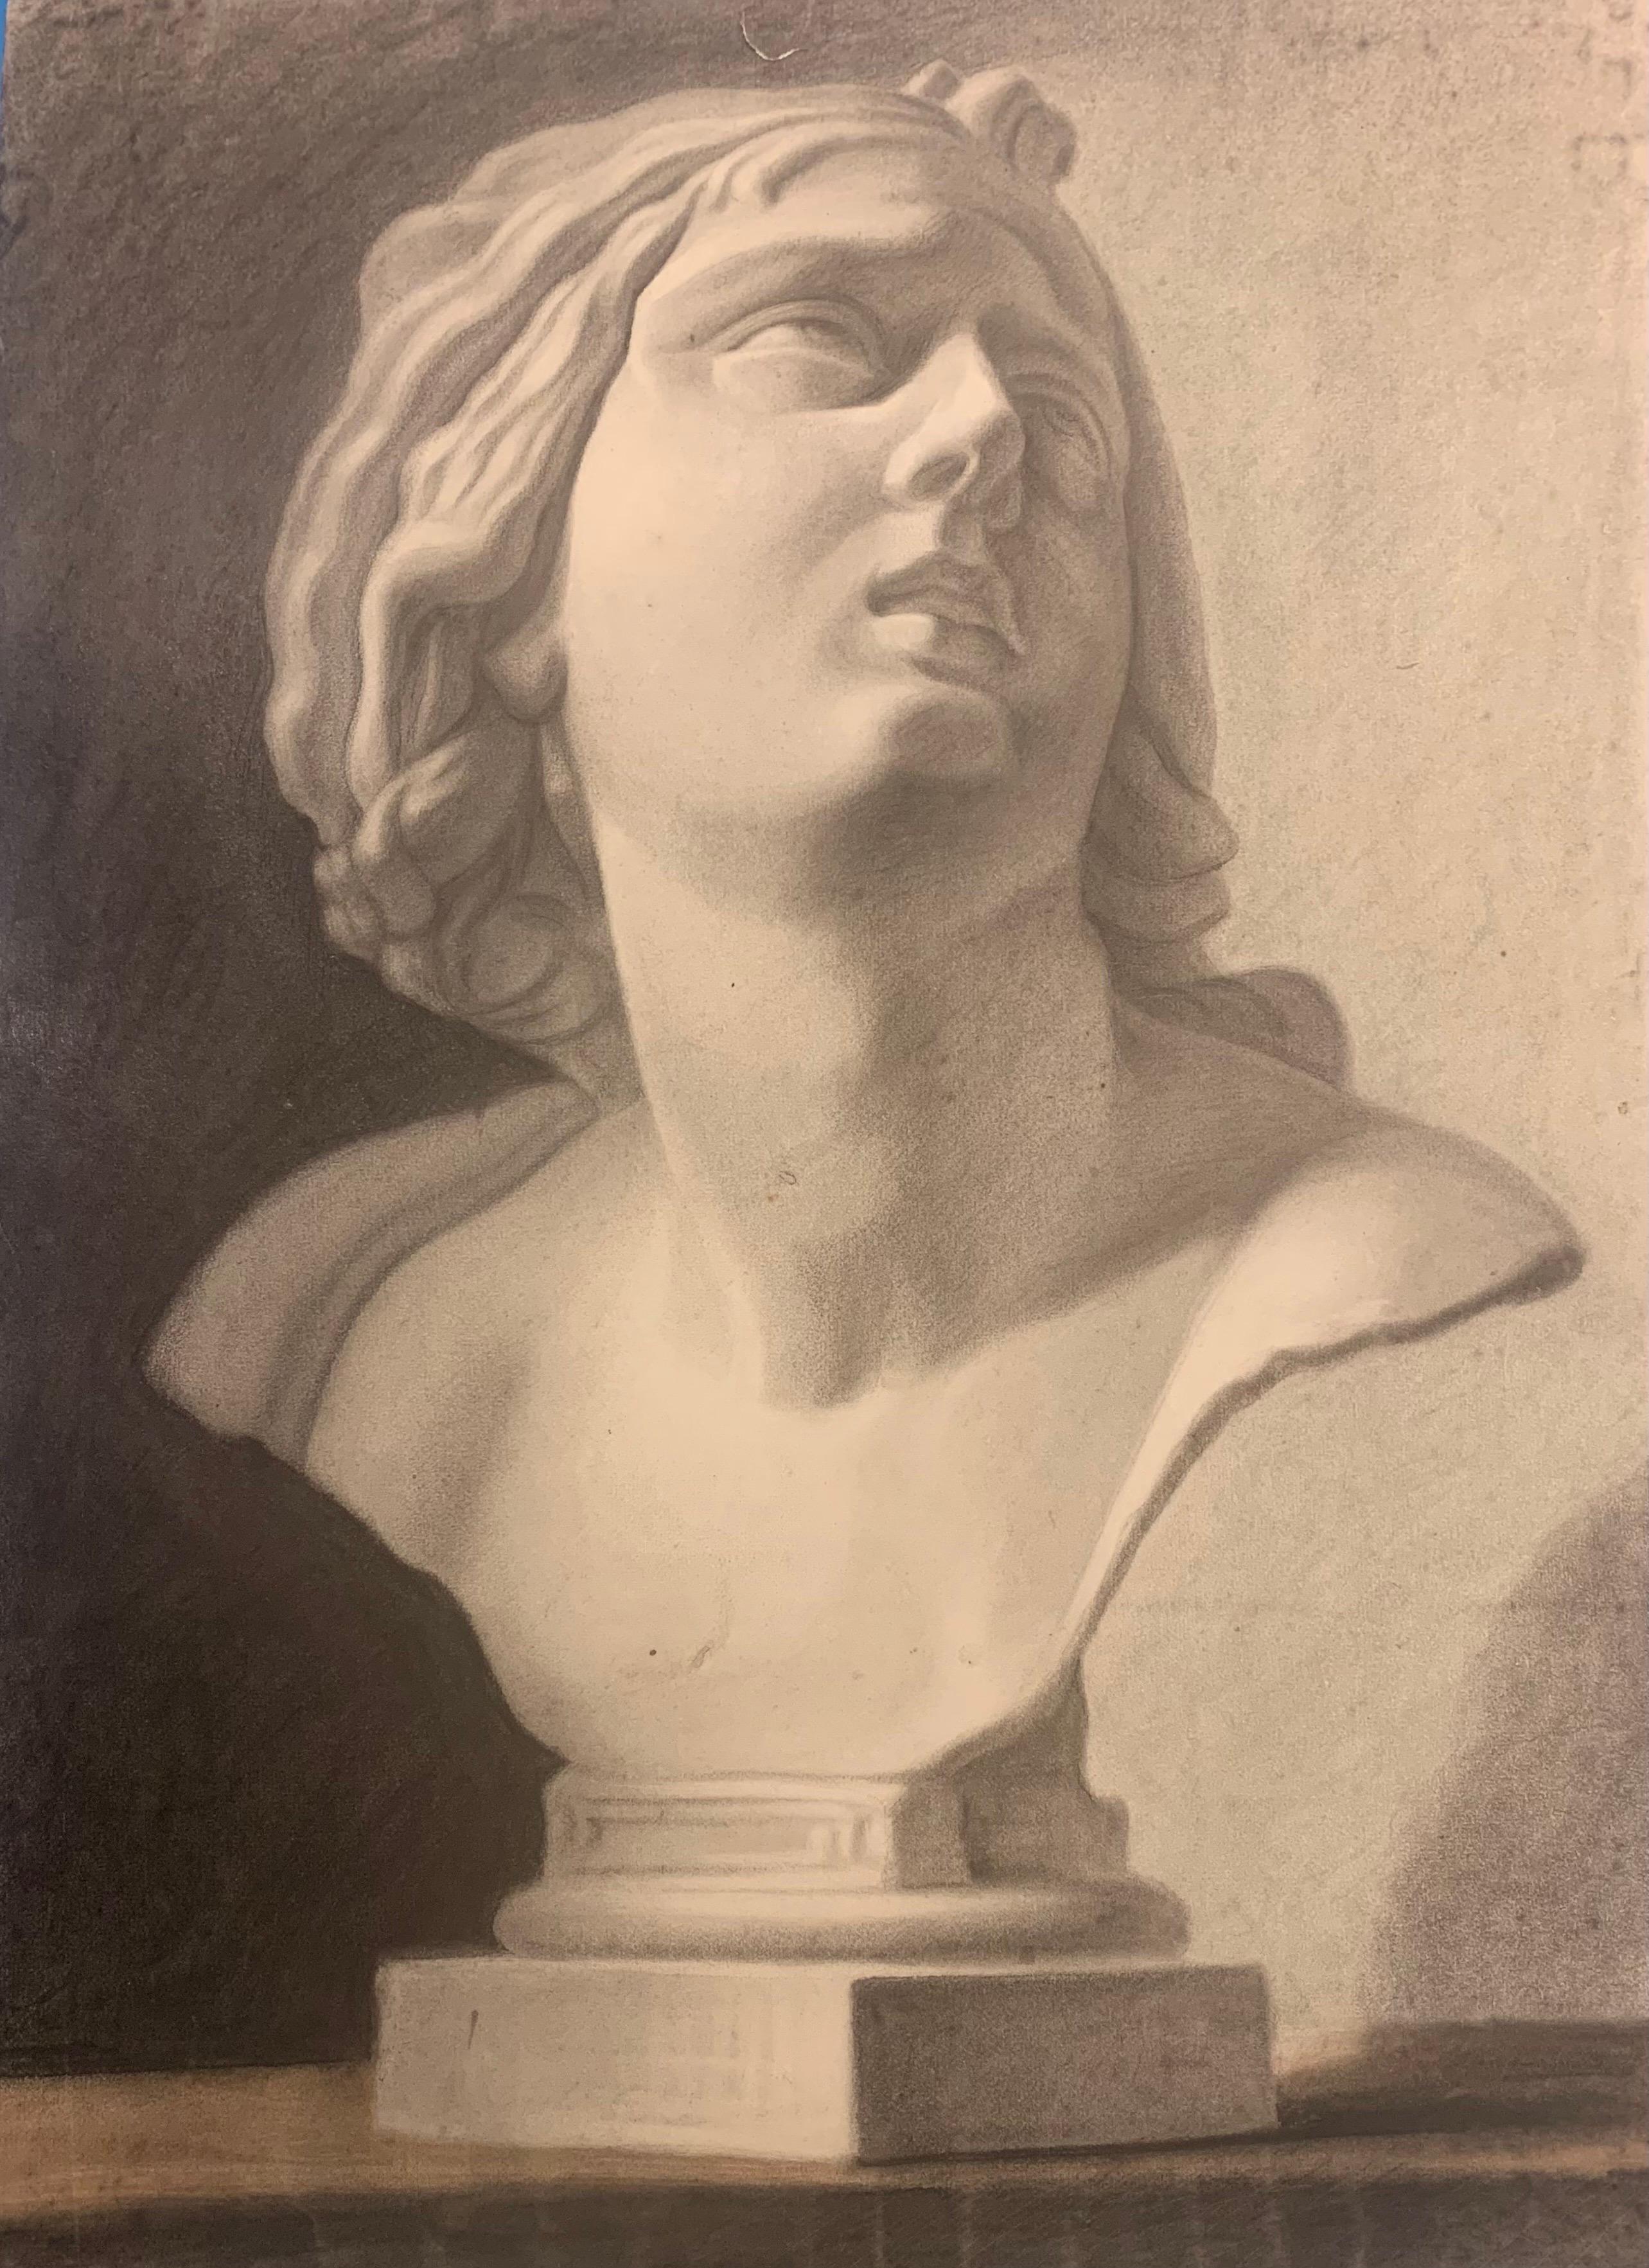 Unknown Portrait - Academic drawing of classical bust sculpture. 19th century